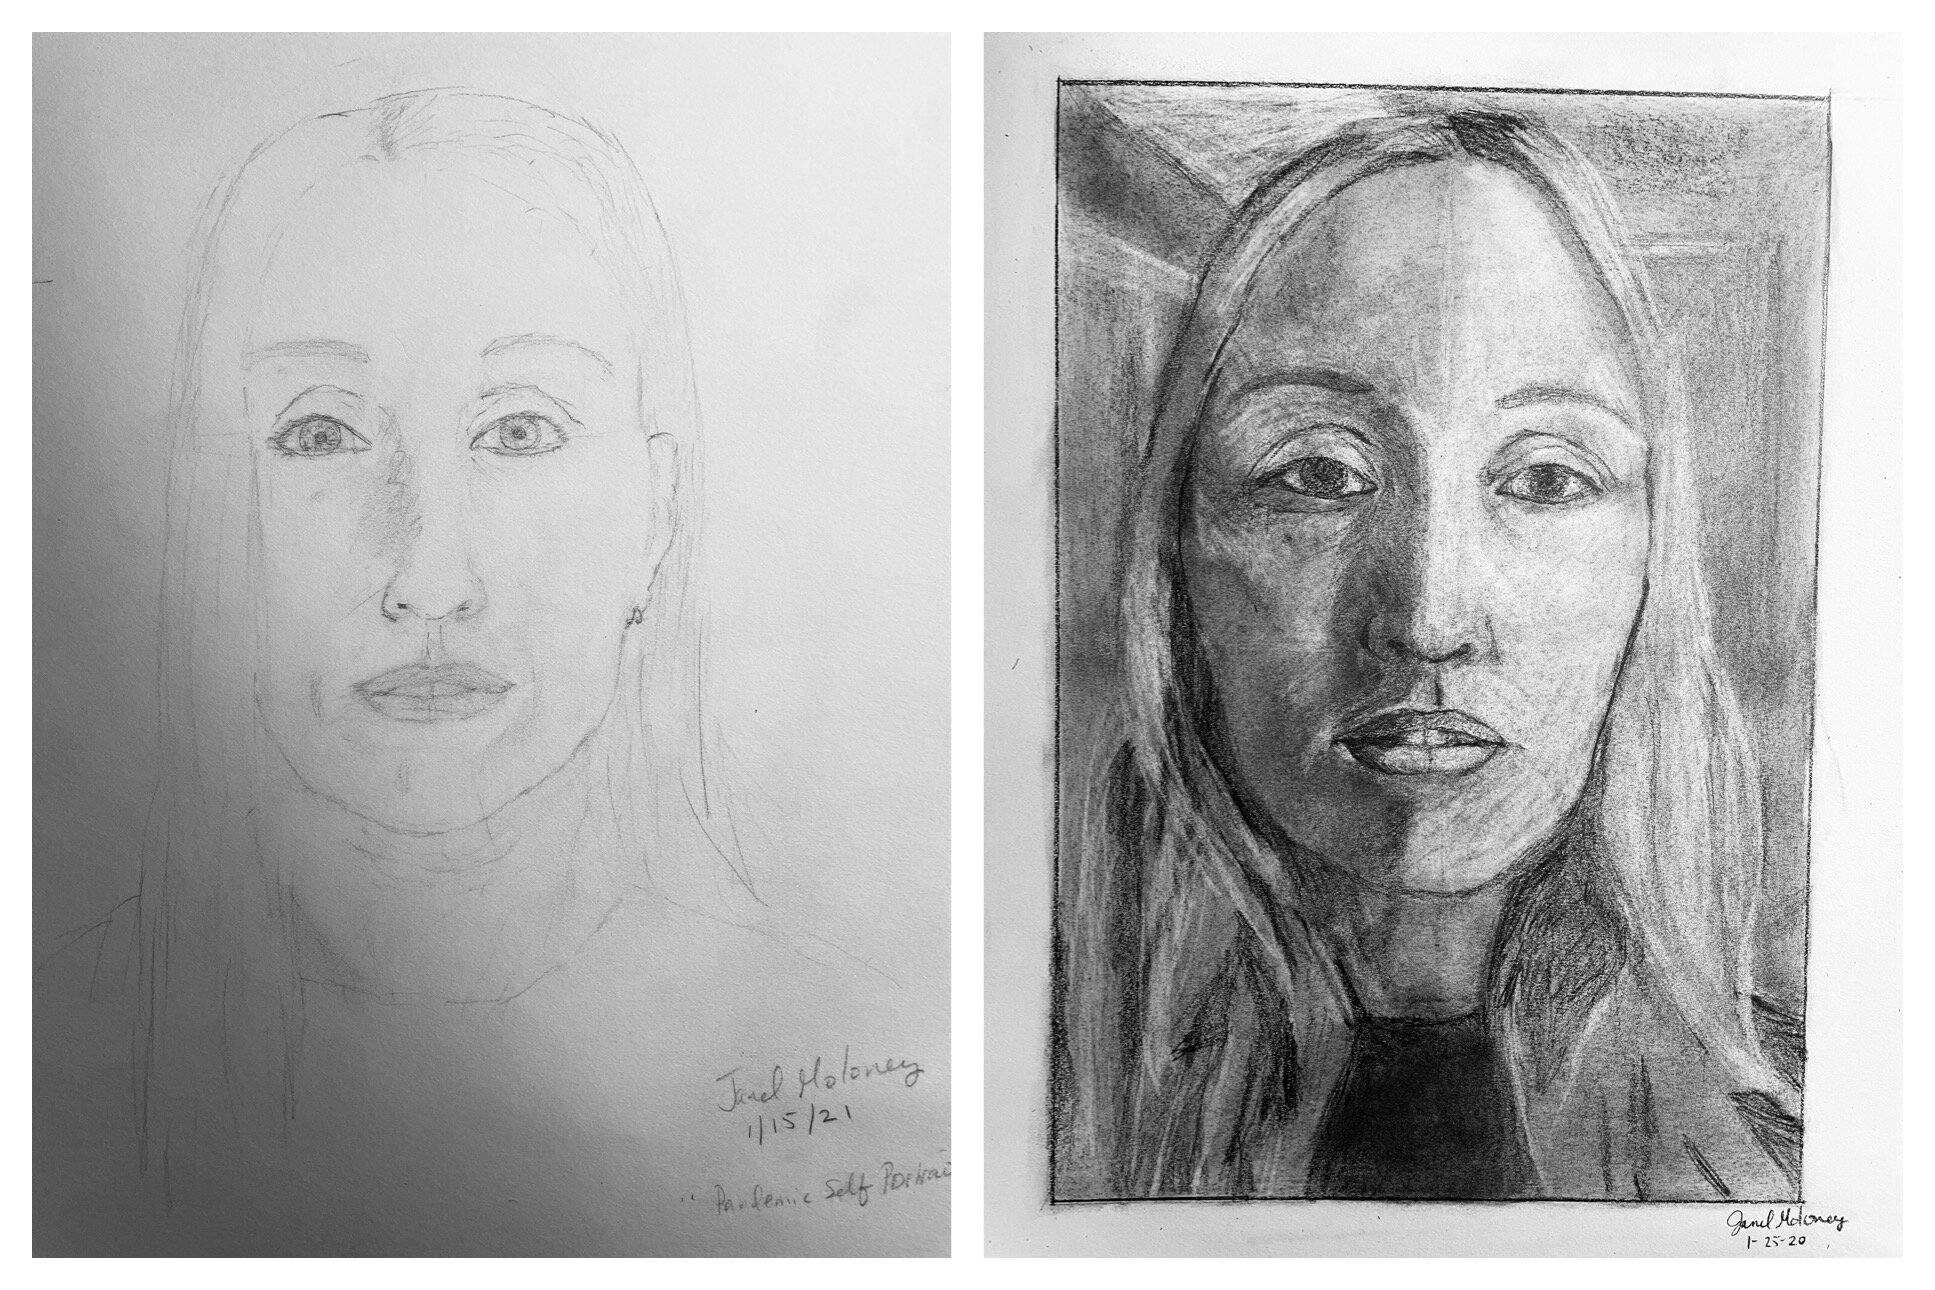 Janel's Before and After Drawings